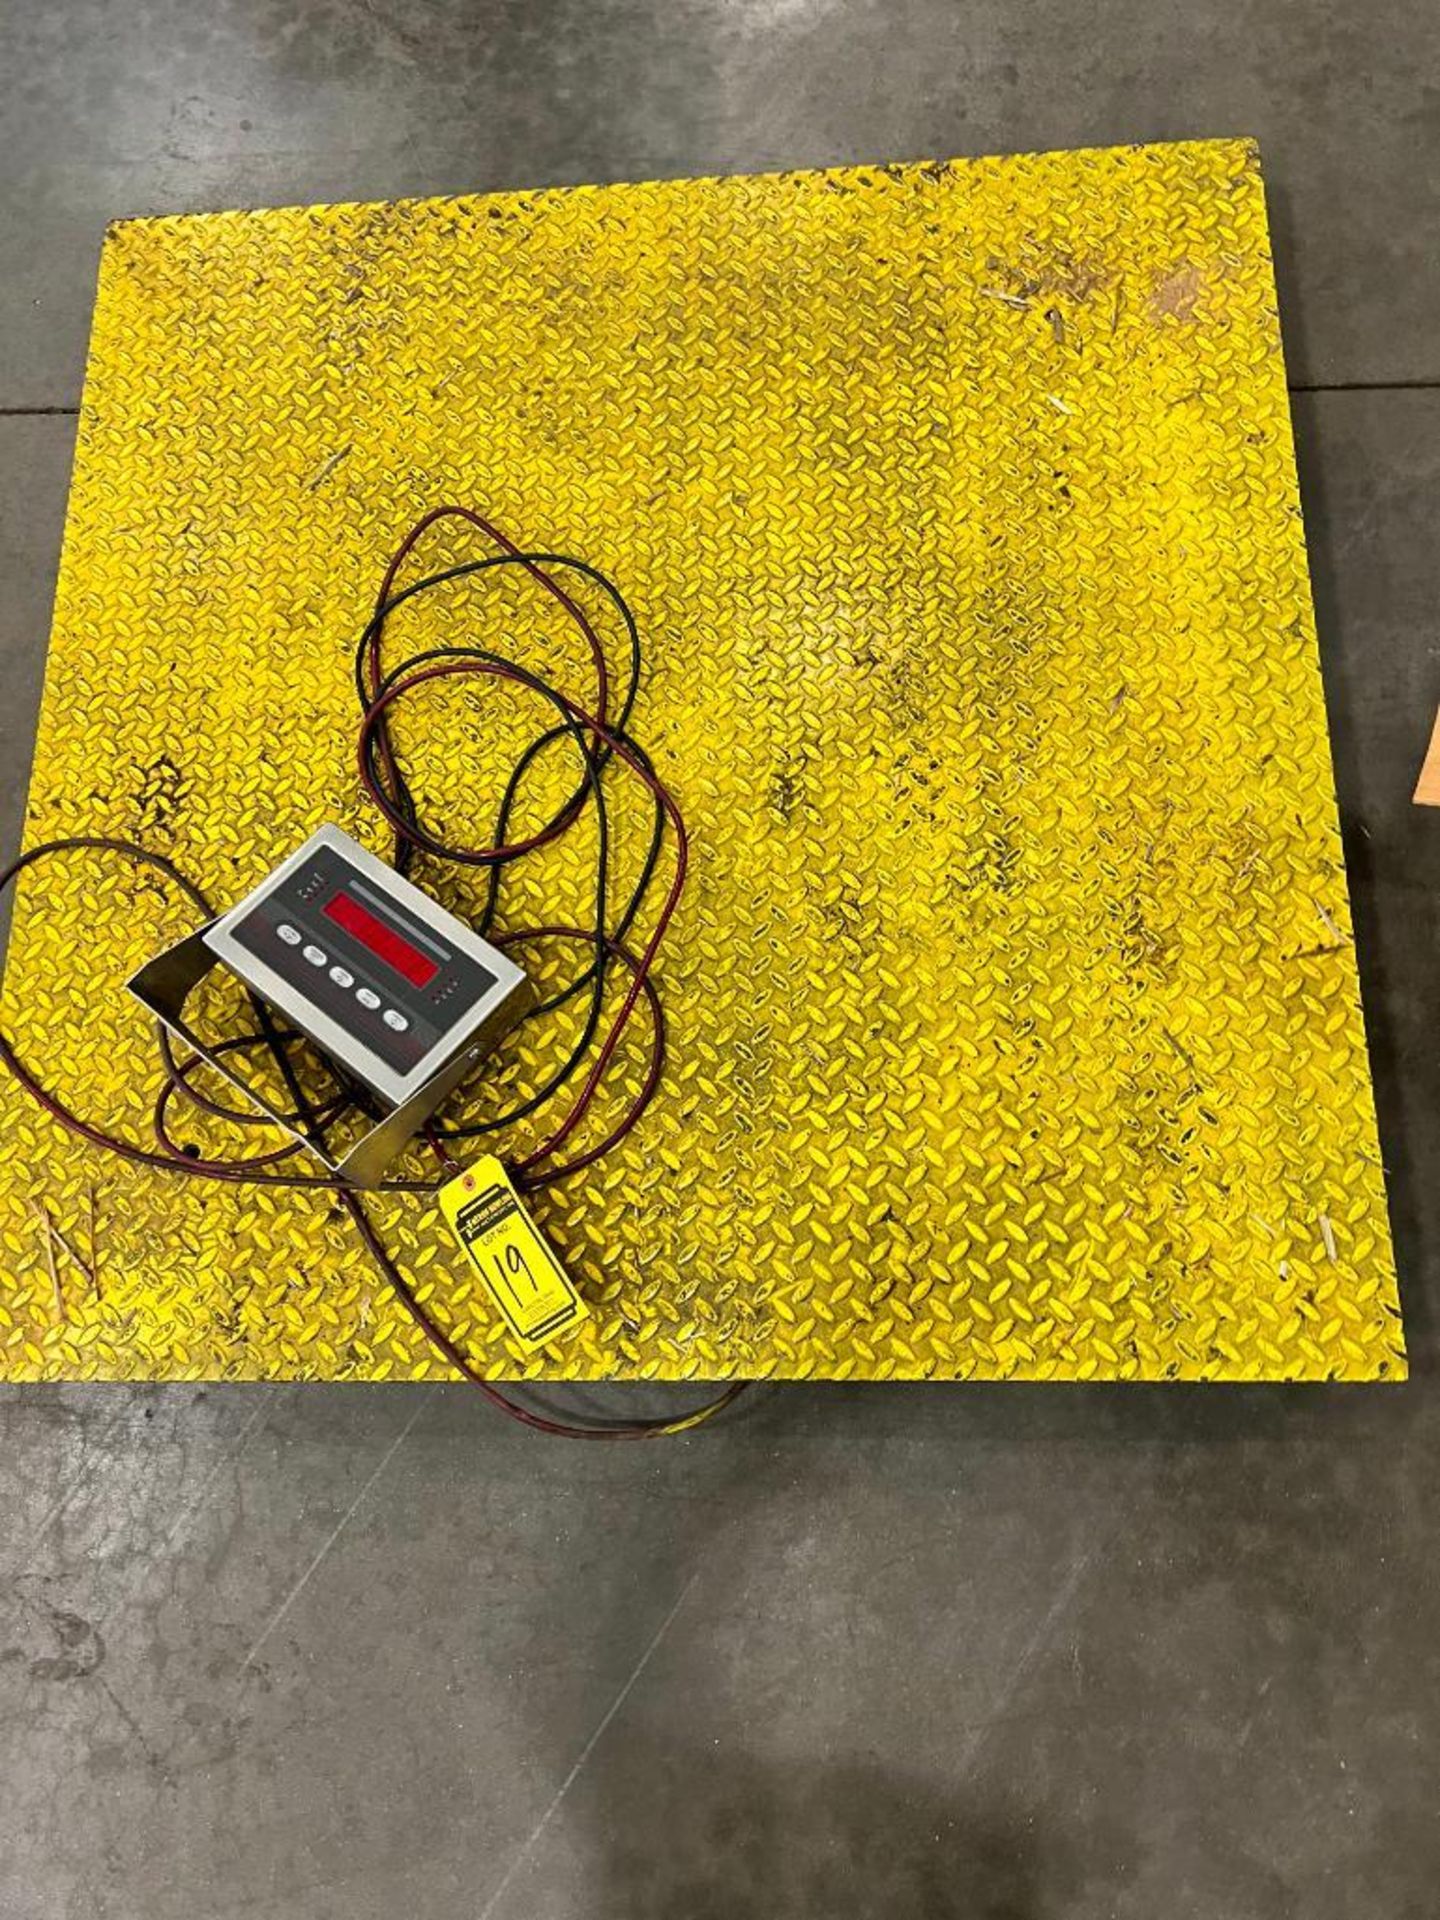 Floor Scale w/ Rice Lake Weighing Digital Readout ($15 Loading fee will be added to buyers invoice) - Bild 2 aus 4